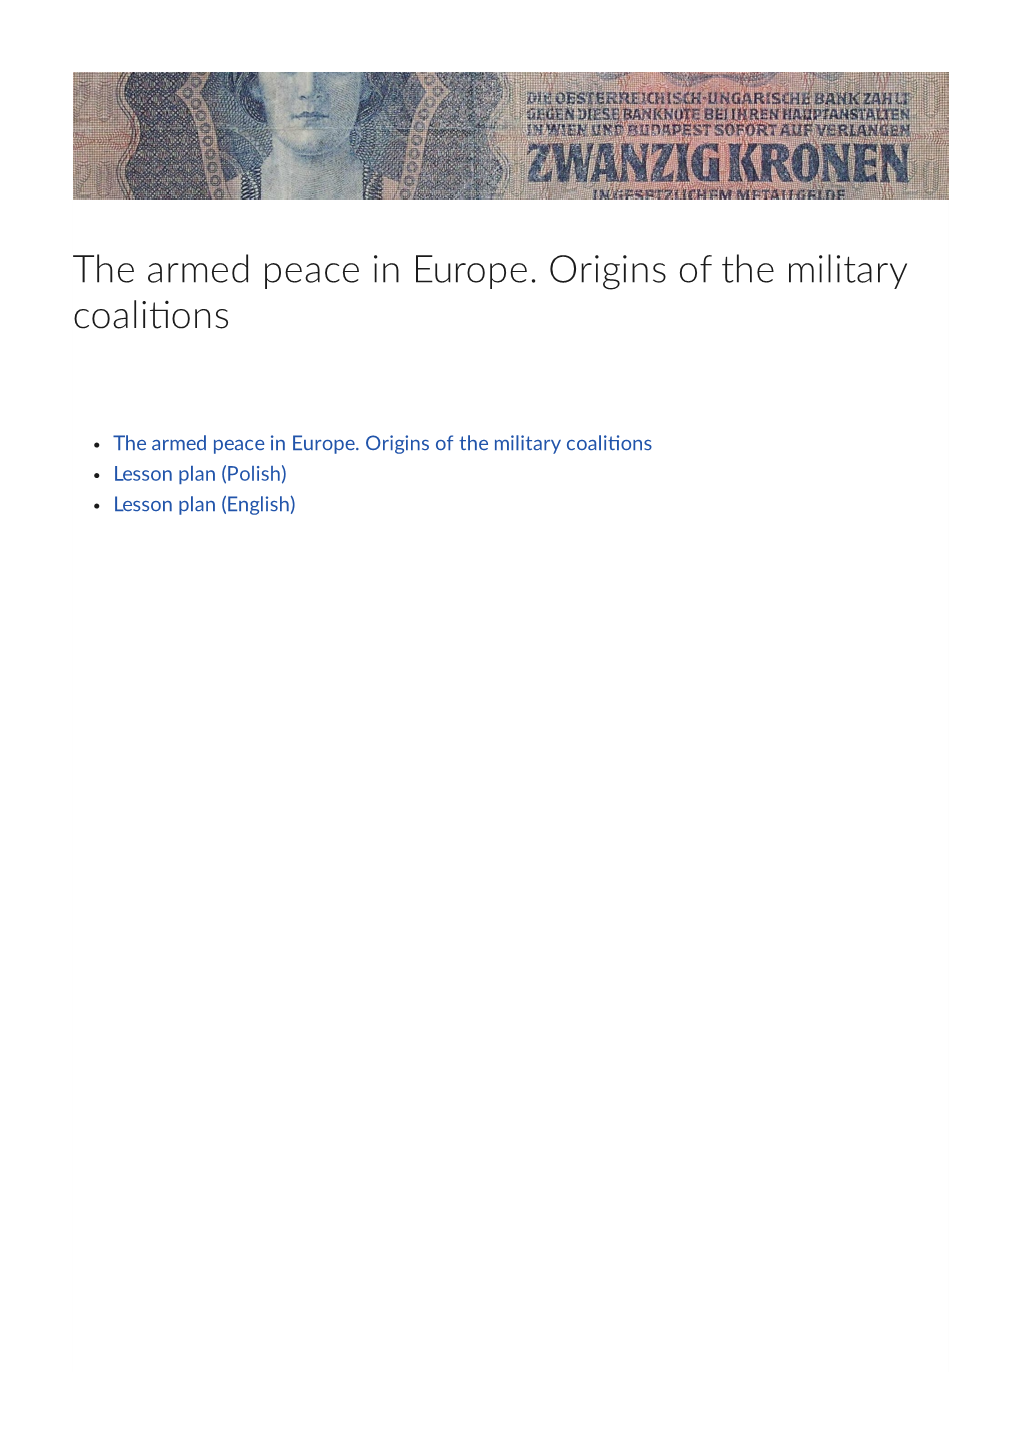 The Armed Peace in Europe. Origins of the Military Coali�Ons